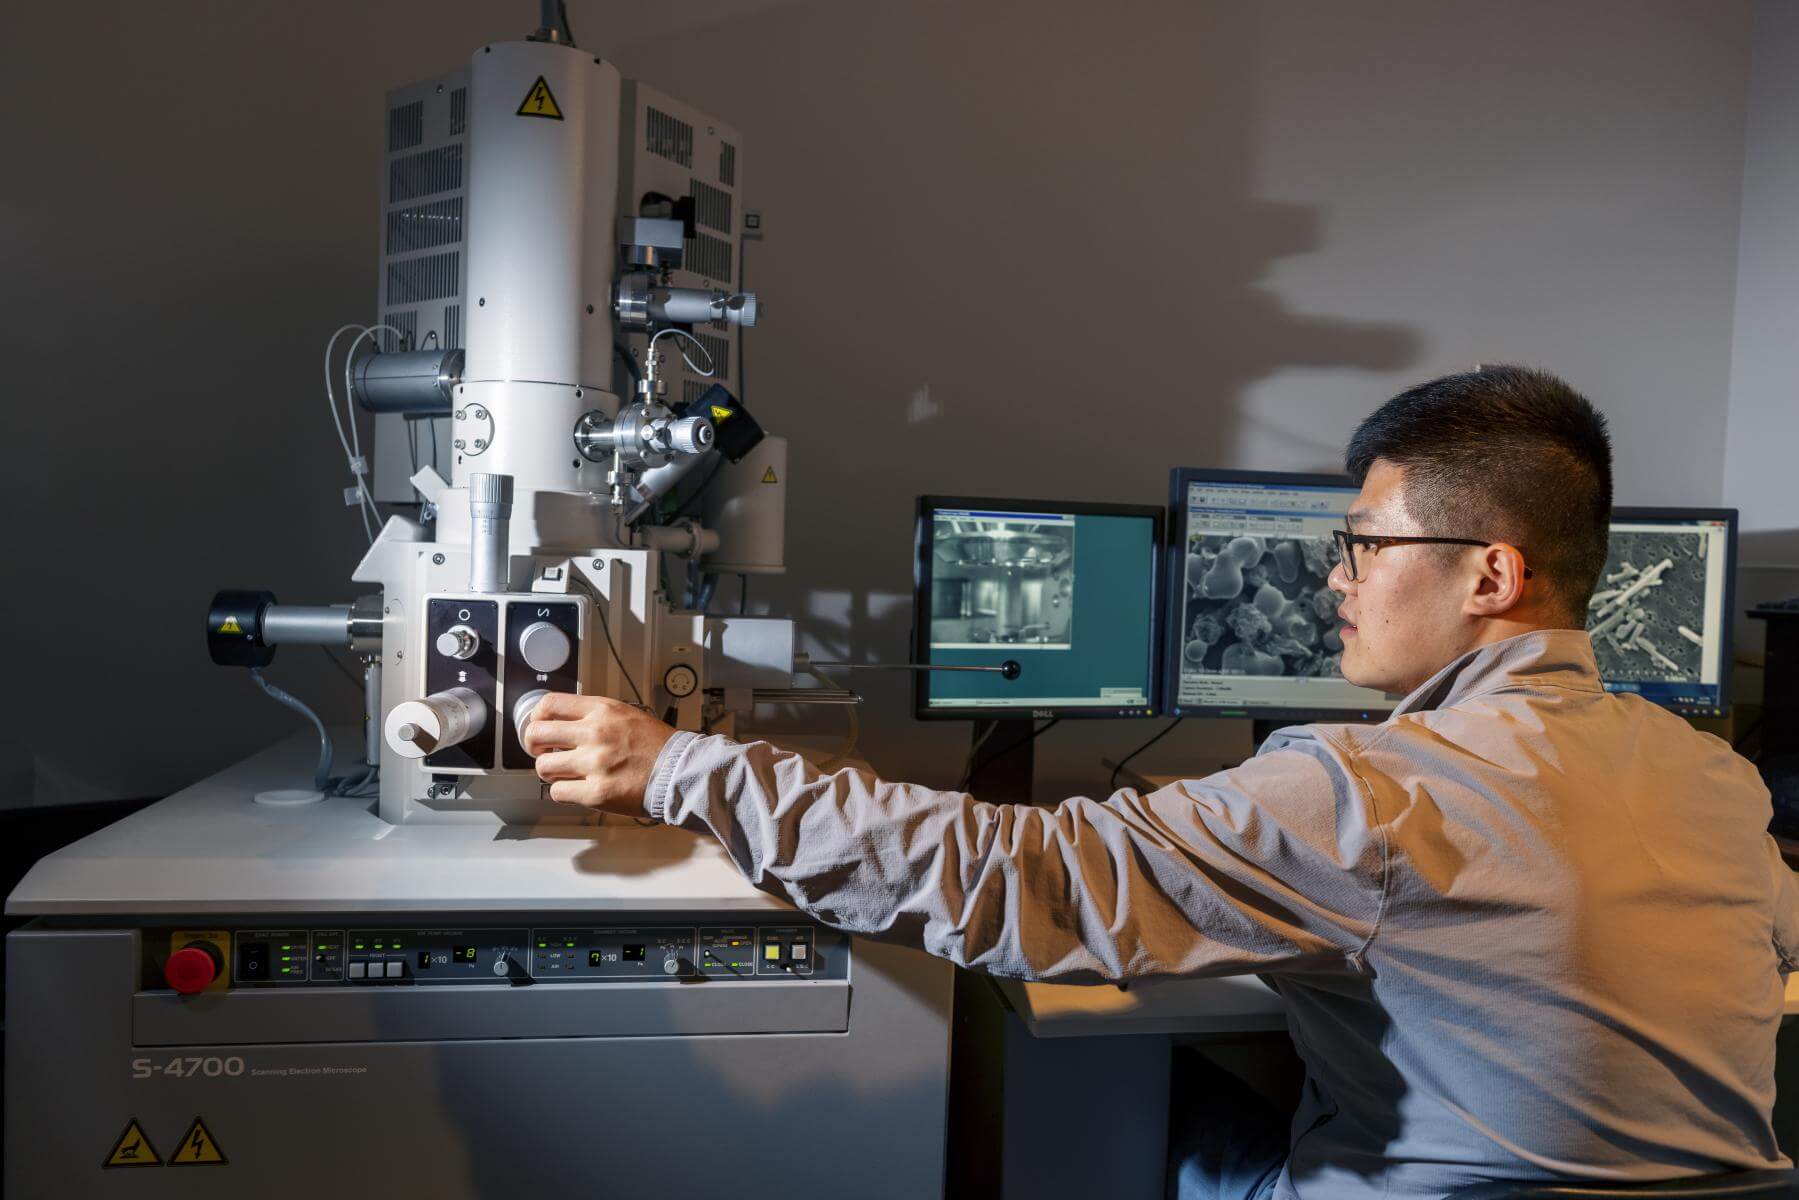 A man adjusts dials on an electron microscope.